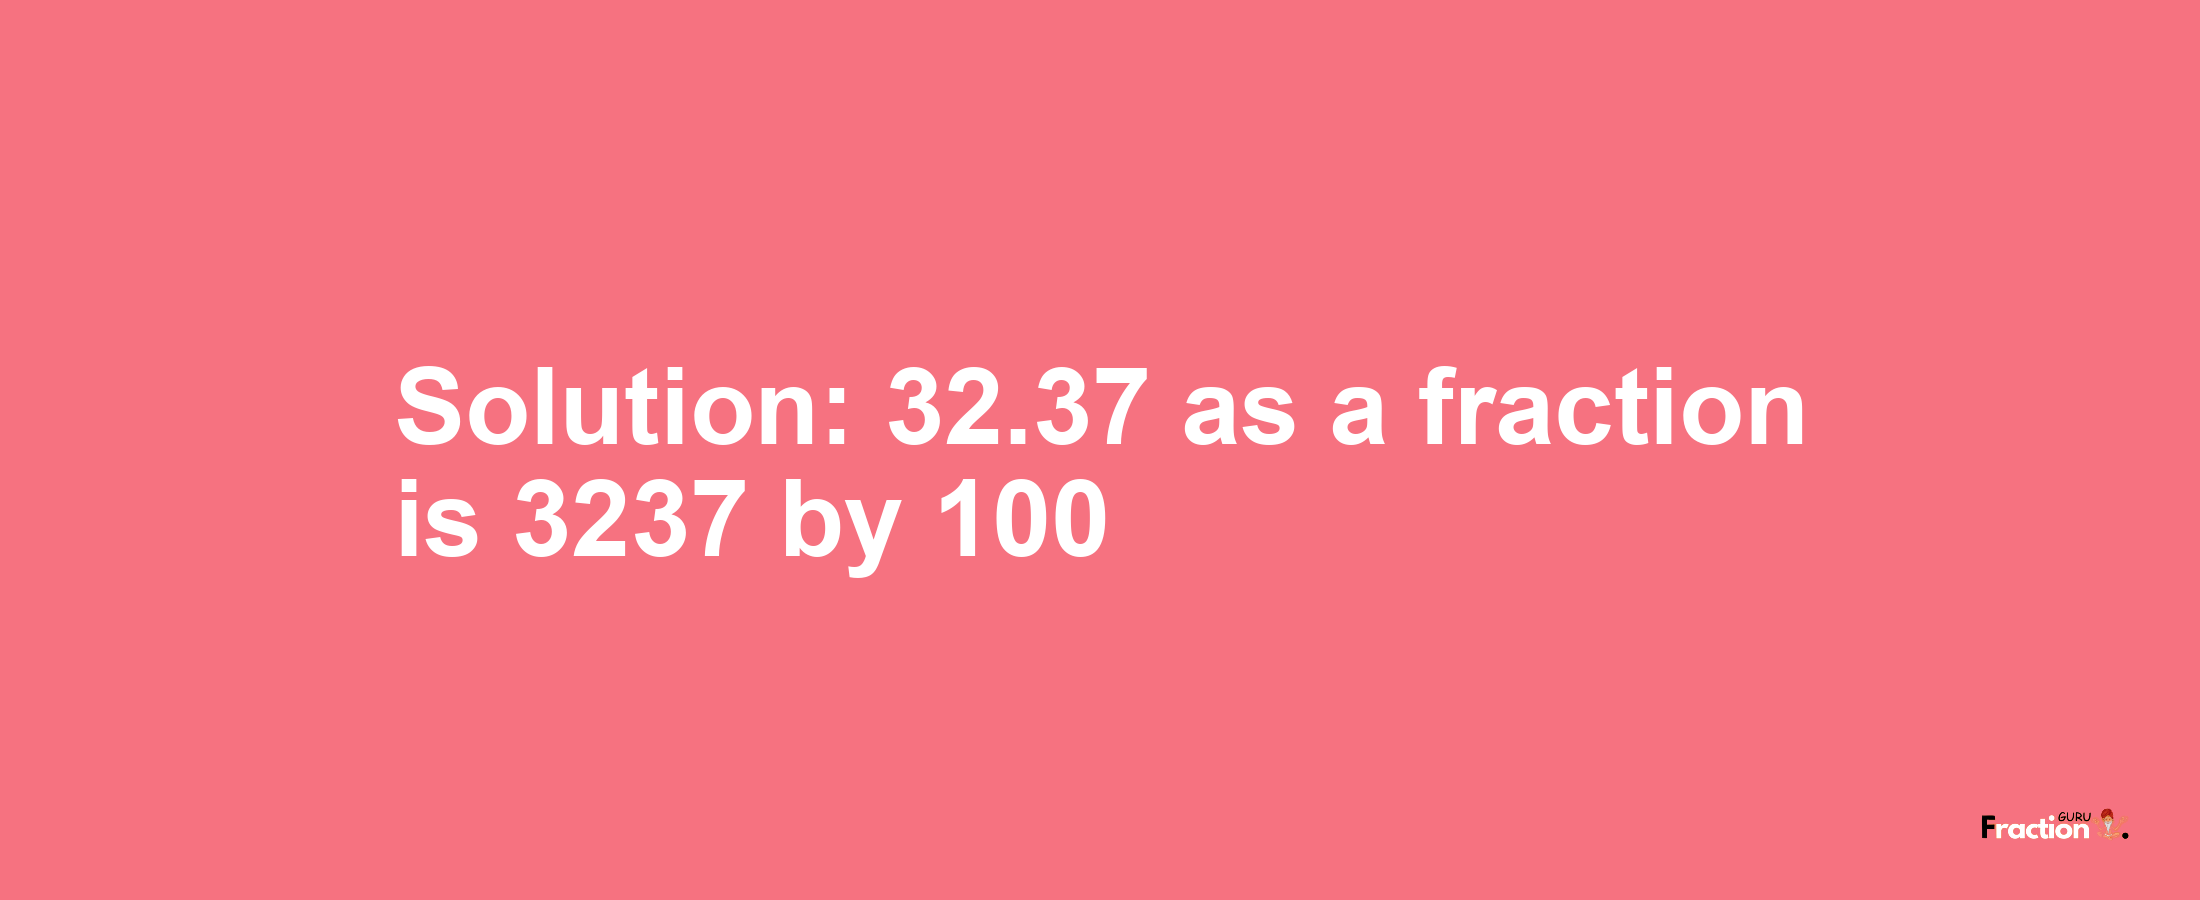 Solution:32.37 as a fraction is 3237/100